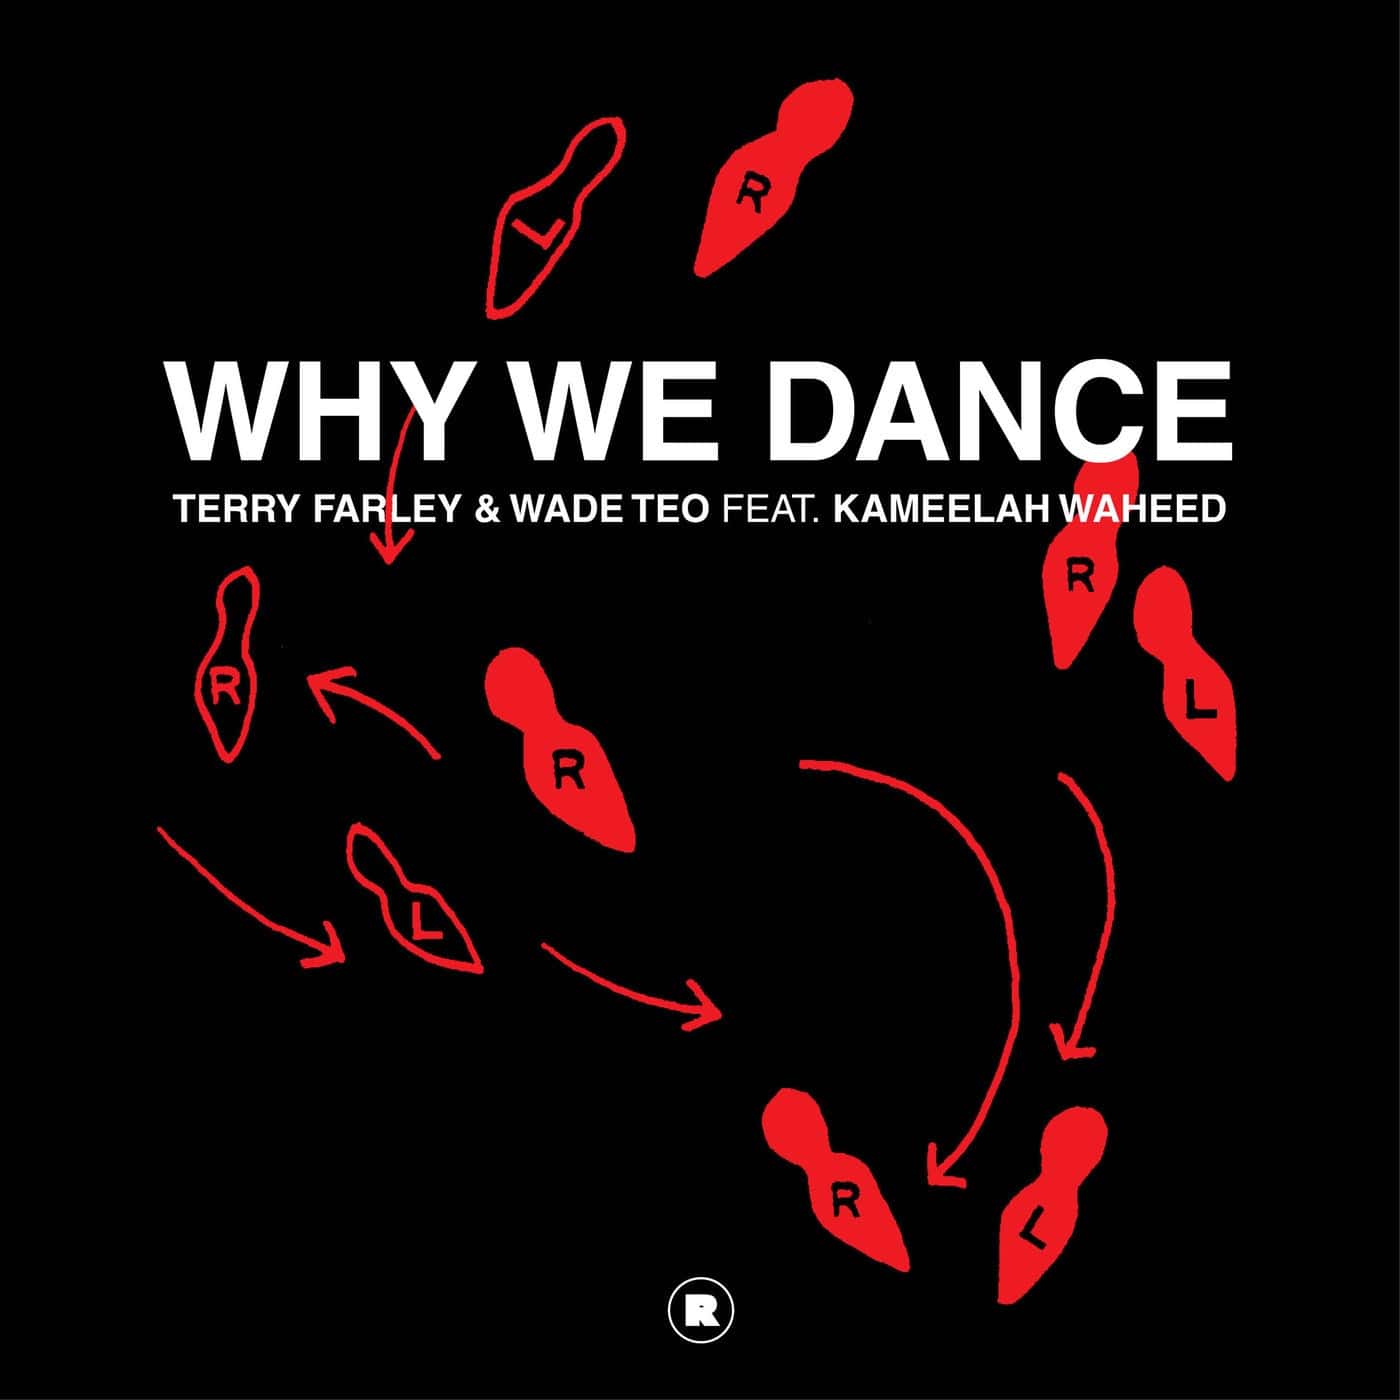 Download Terry Farley, Wade Teo, Kameelah Waheed - Why We Dance on Electrobuzz